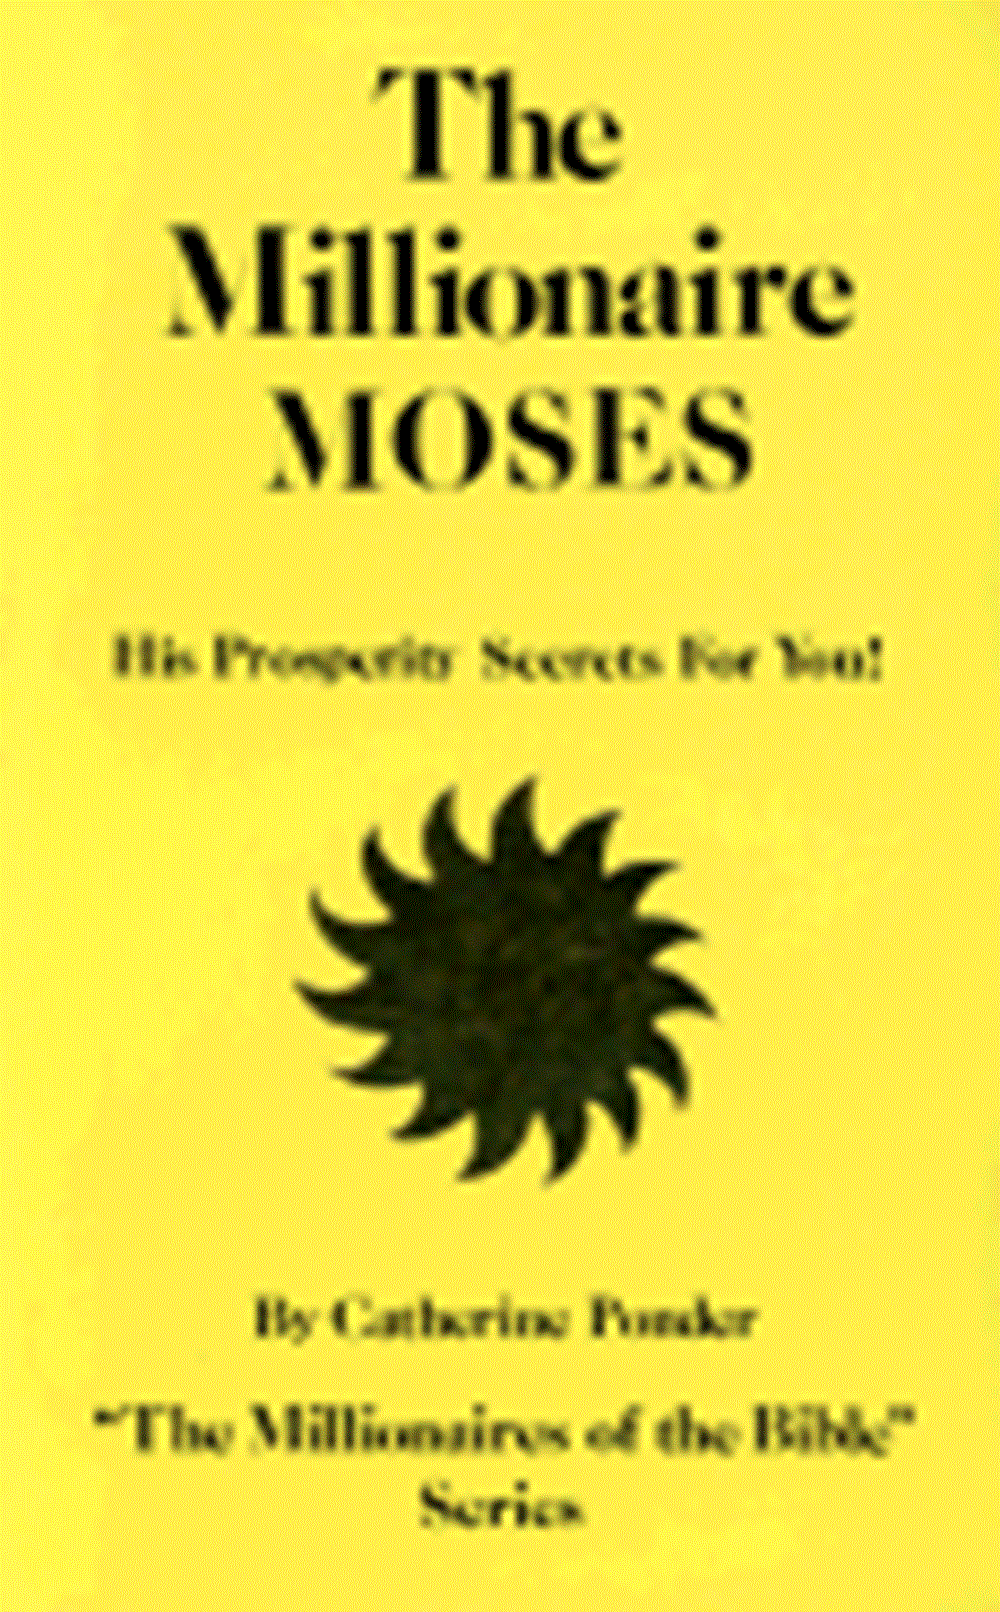 Millionaire Moses His Prosperity Secrets for You! (Revised)